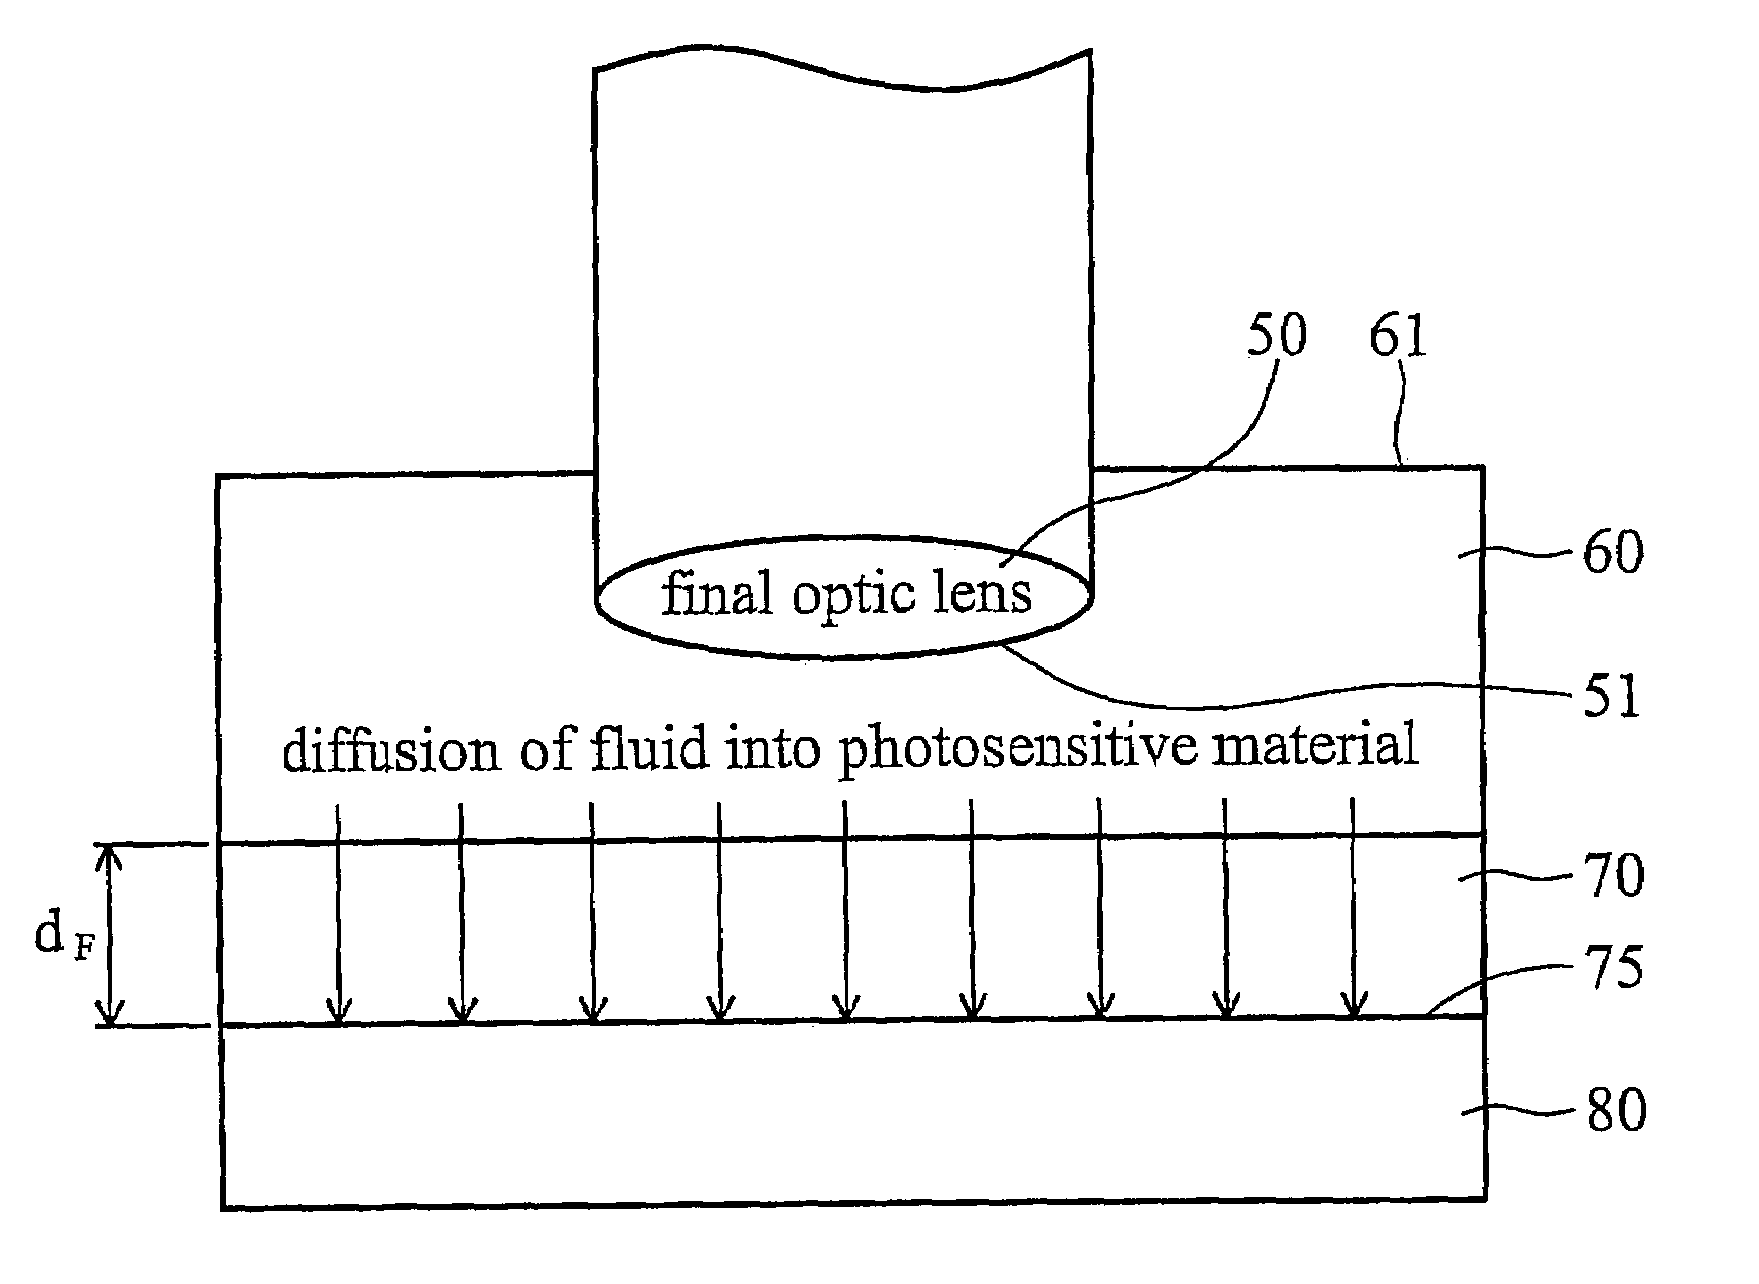 Lithography apparatus for manufacture of integrated circuits